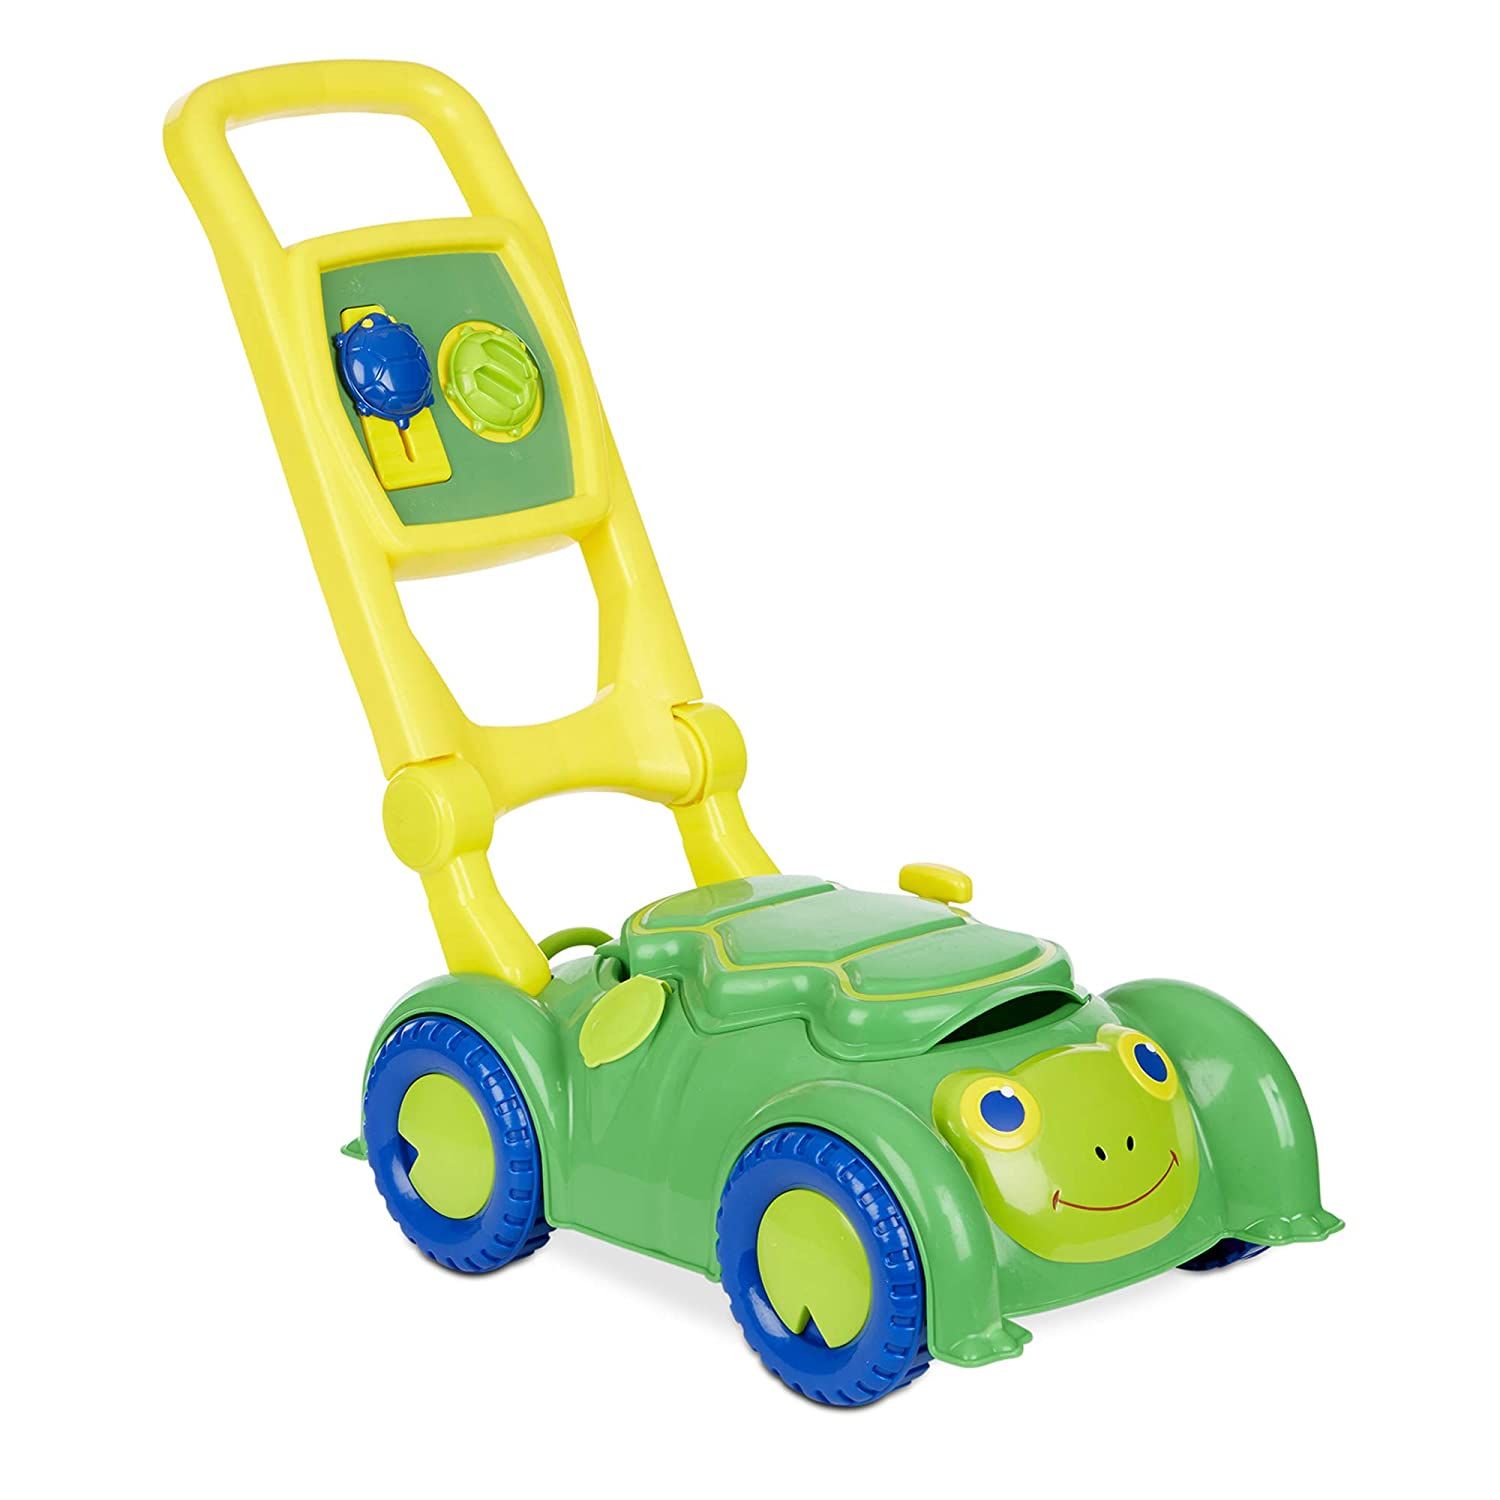 Sunny Patch Snappy Turtle Lawn Mower